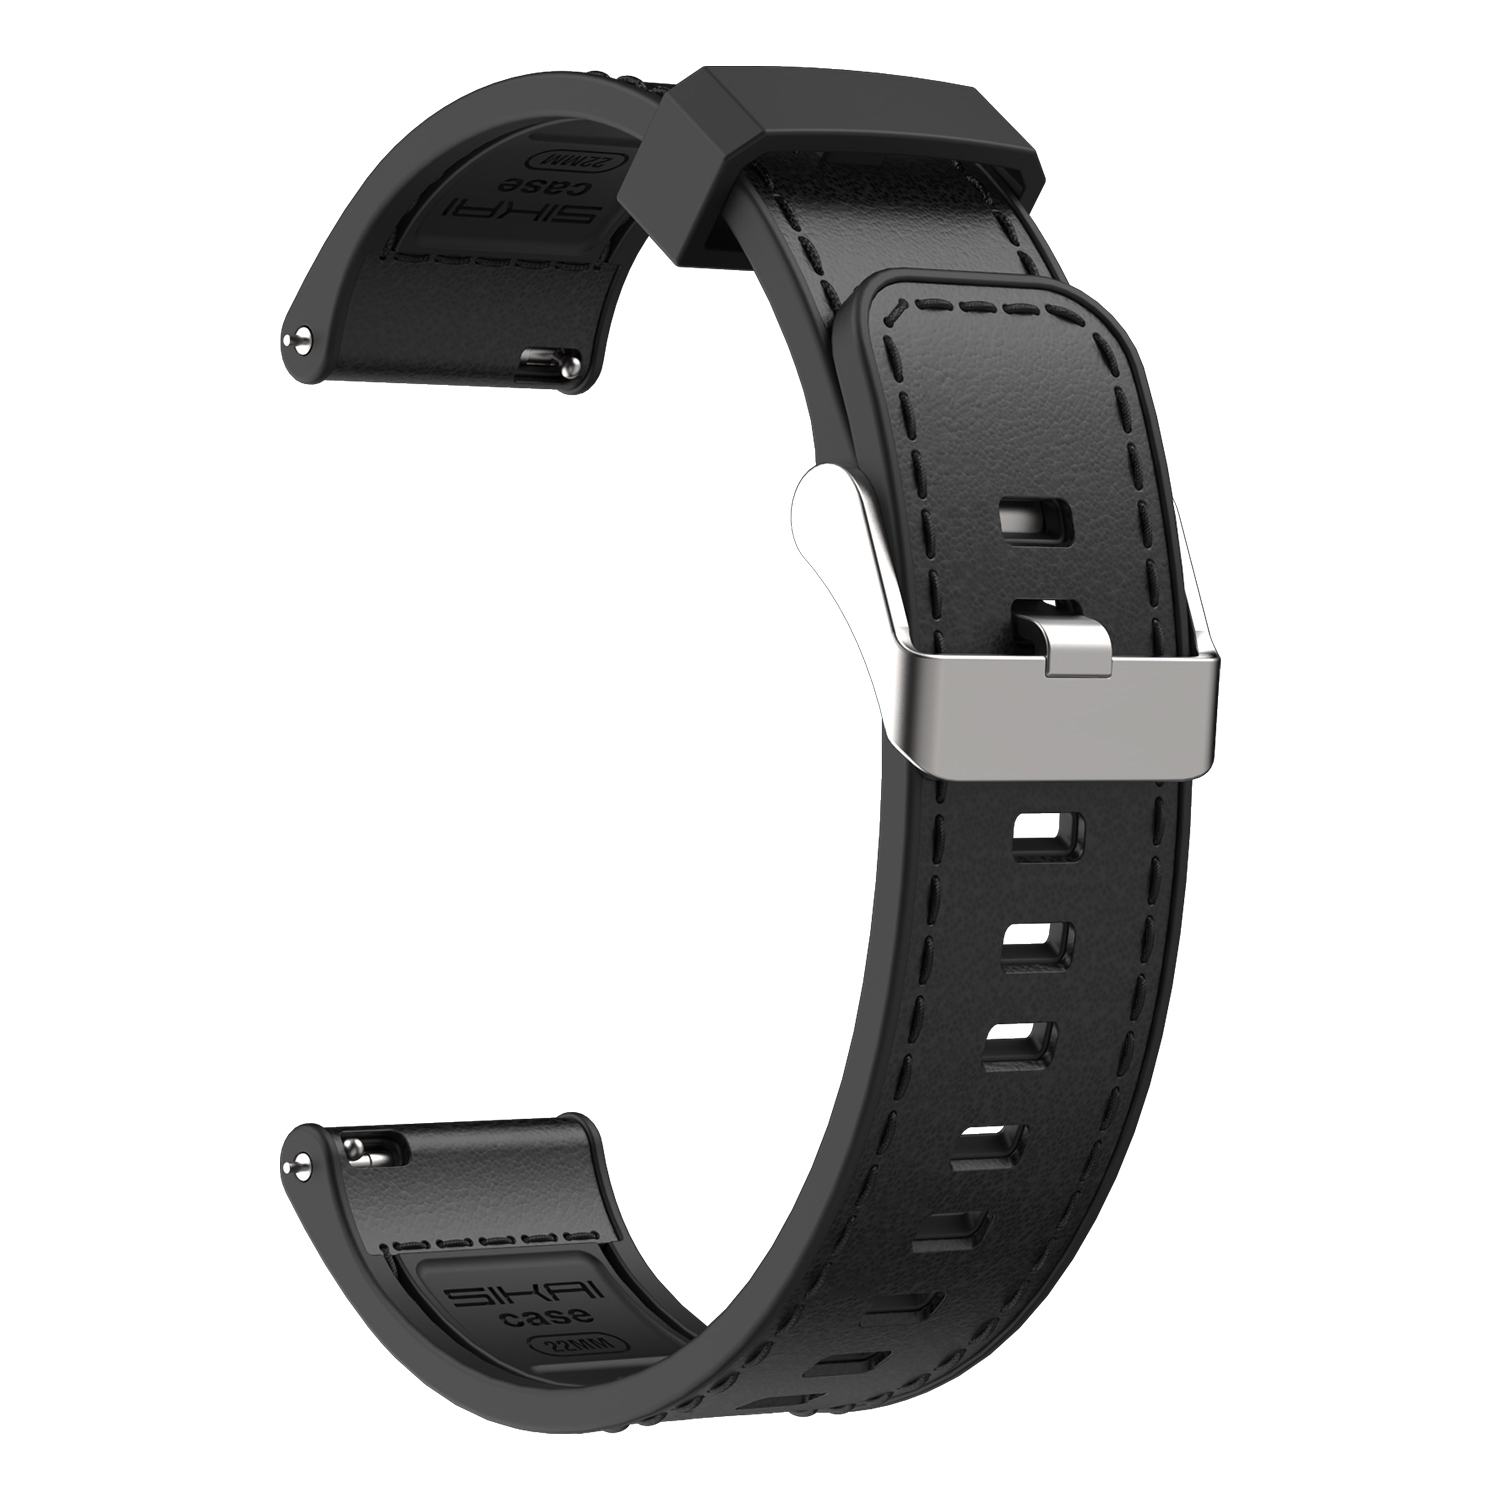 Find Bakeey 22mm Silicone Leather Replacement Strap Smart Watch Band For Huawei GT 2 46MM/Honor Magic 2 46MM for Sale on Gipsybee.com with cryptocurrencies